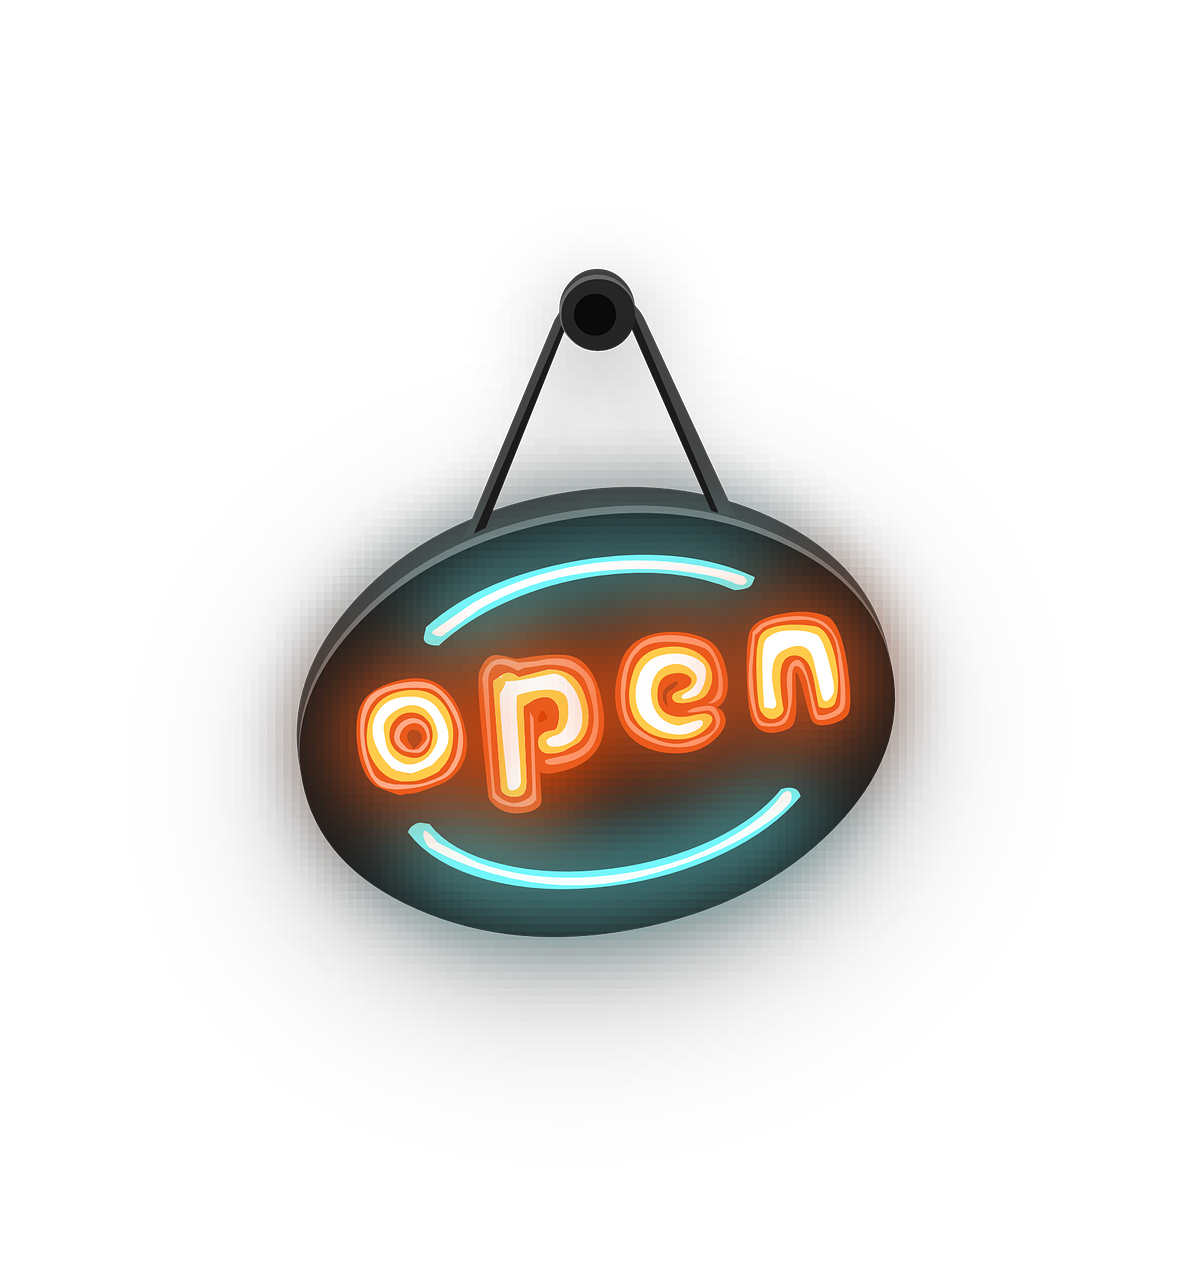 OPENNEONSIGN